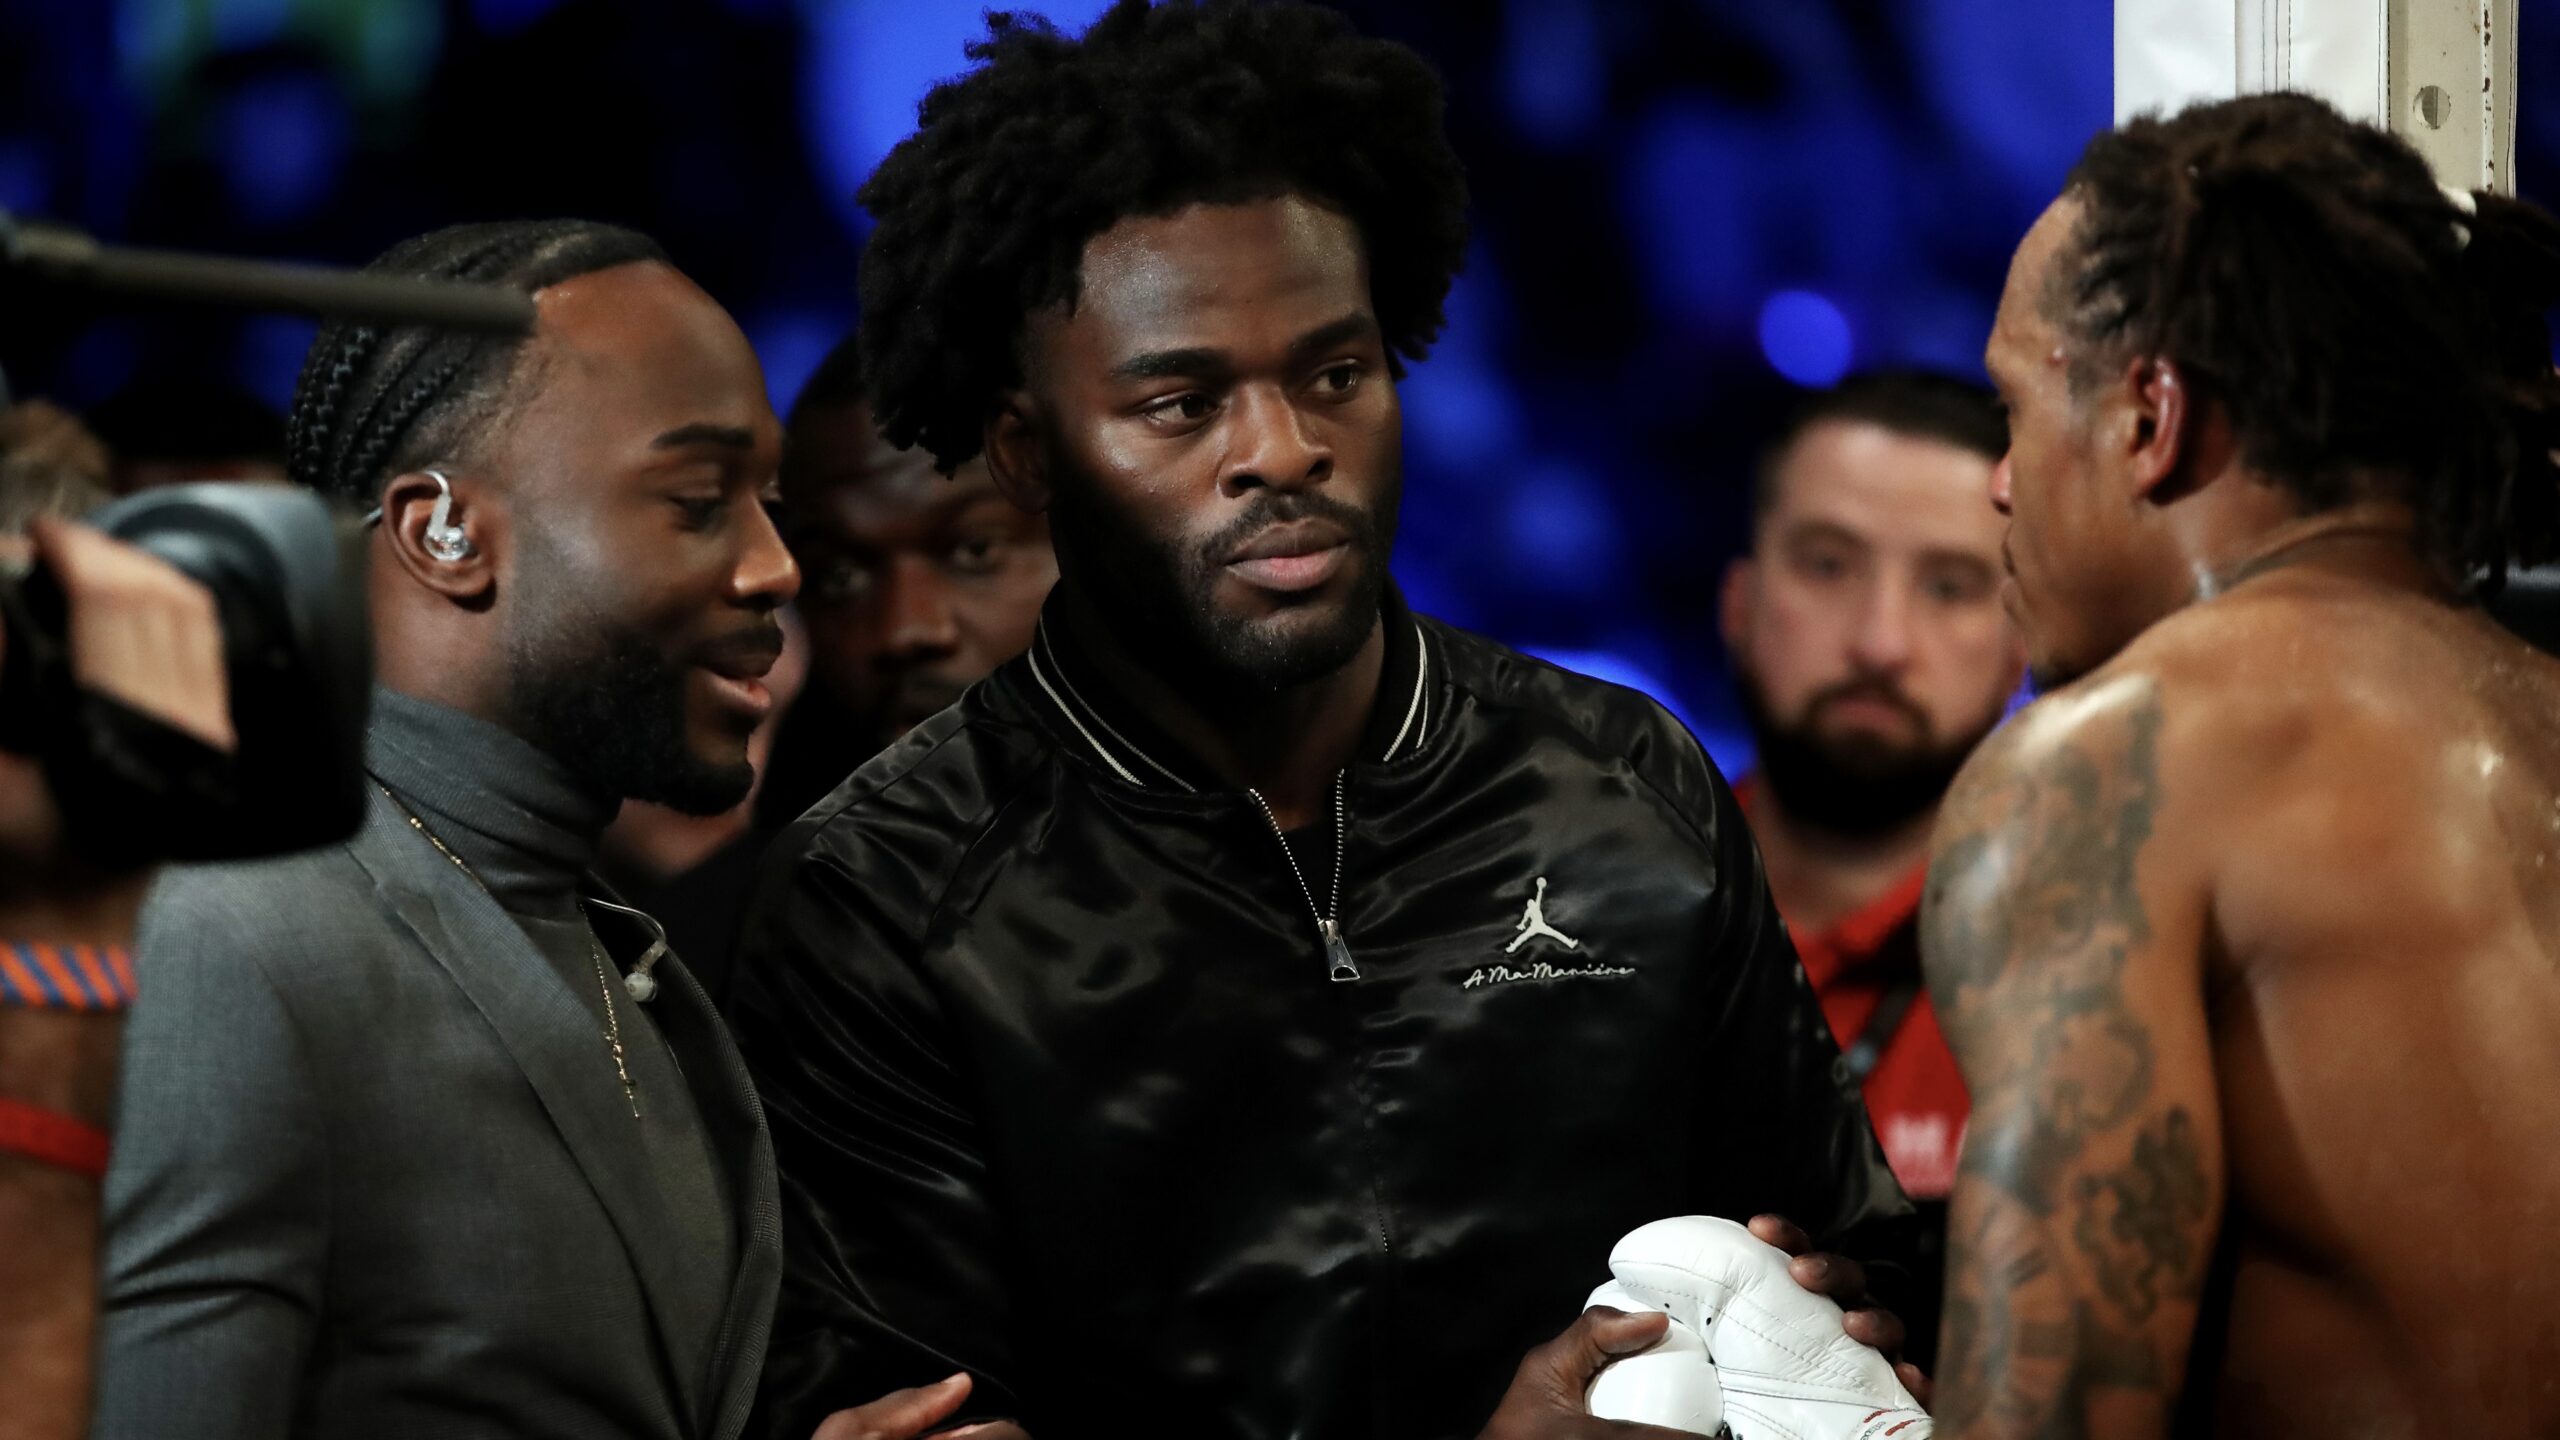 "It's a fight that makes sense for both of us" - Joshua Buatsi makes it clear he wants to face Anthony Yarde